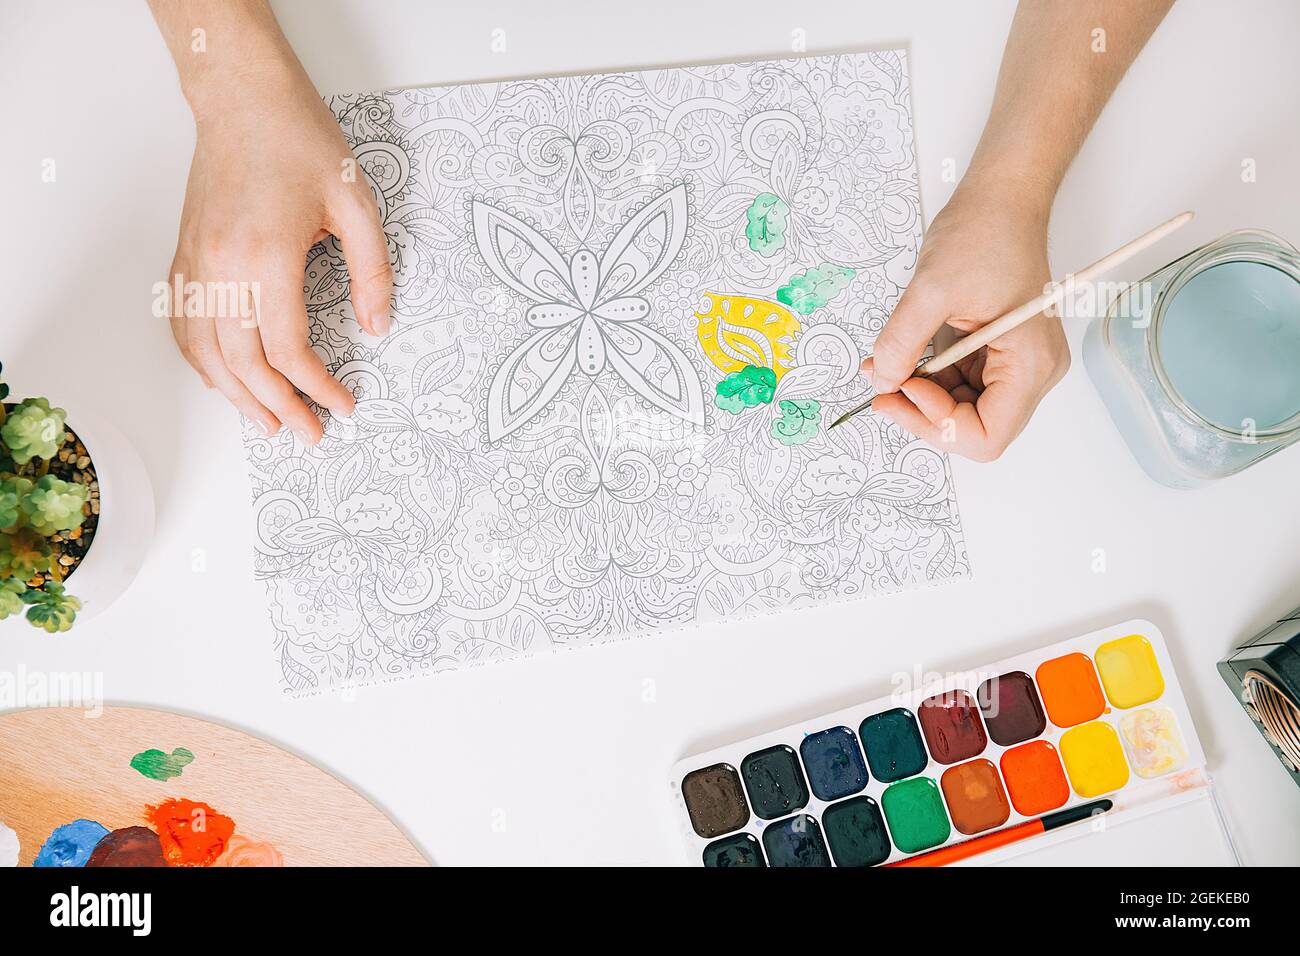 Art therapy or self expression for adults. Young woman is coloring page anti stress book, mental wellbeing concept. Workspace of artist - paints, penc Stock Photo